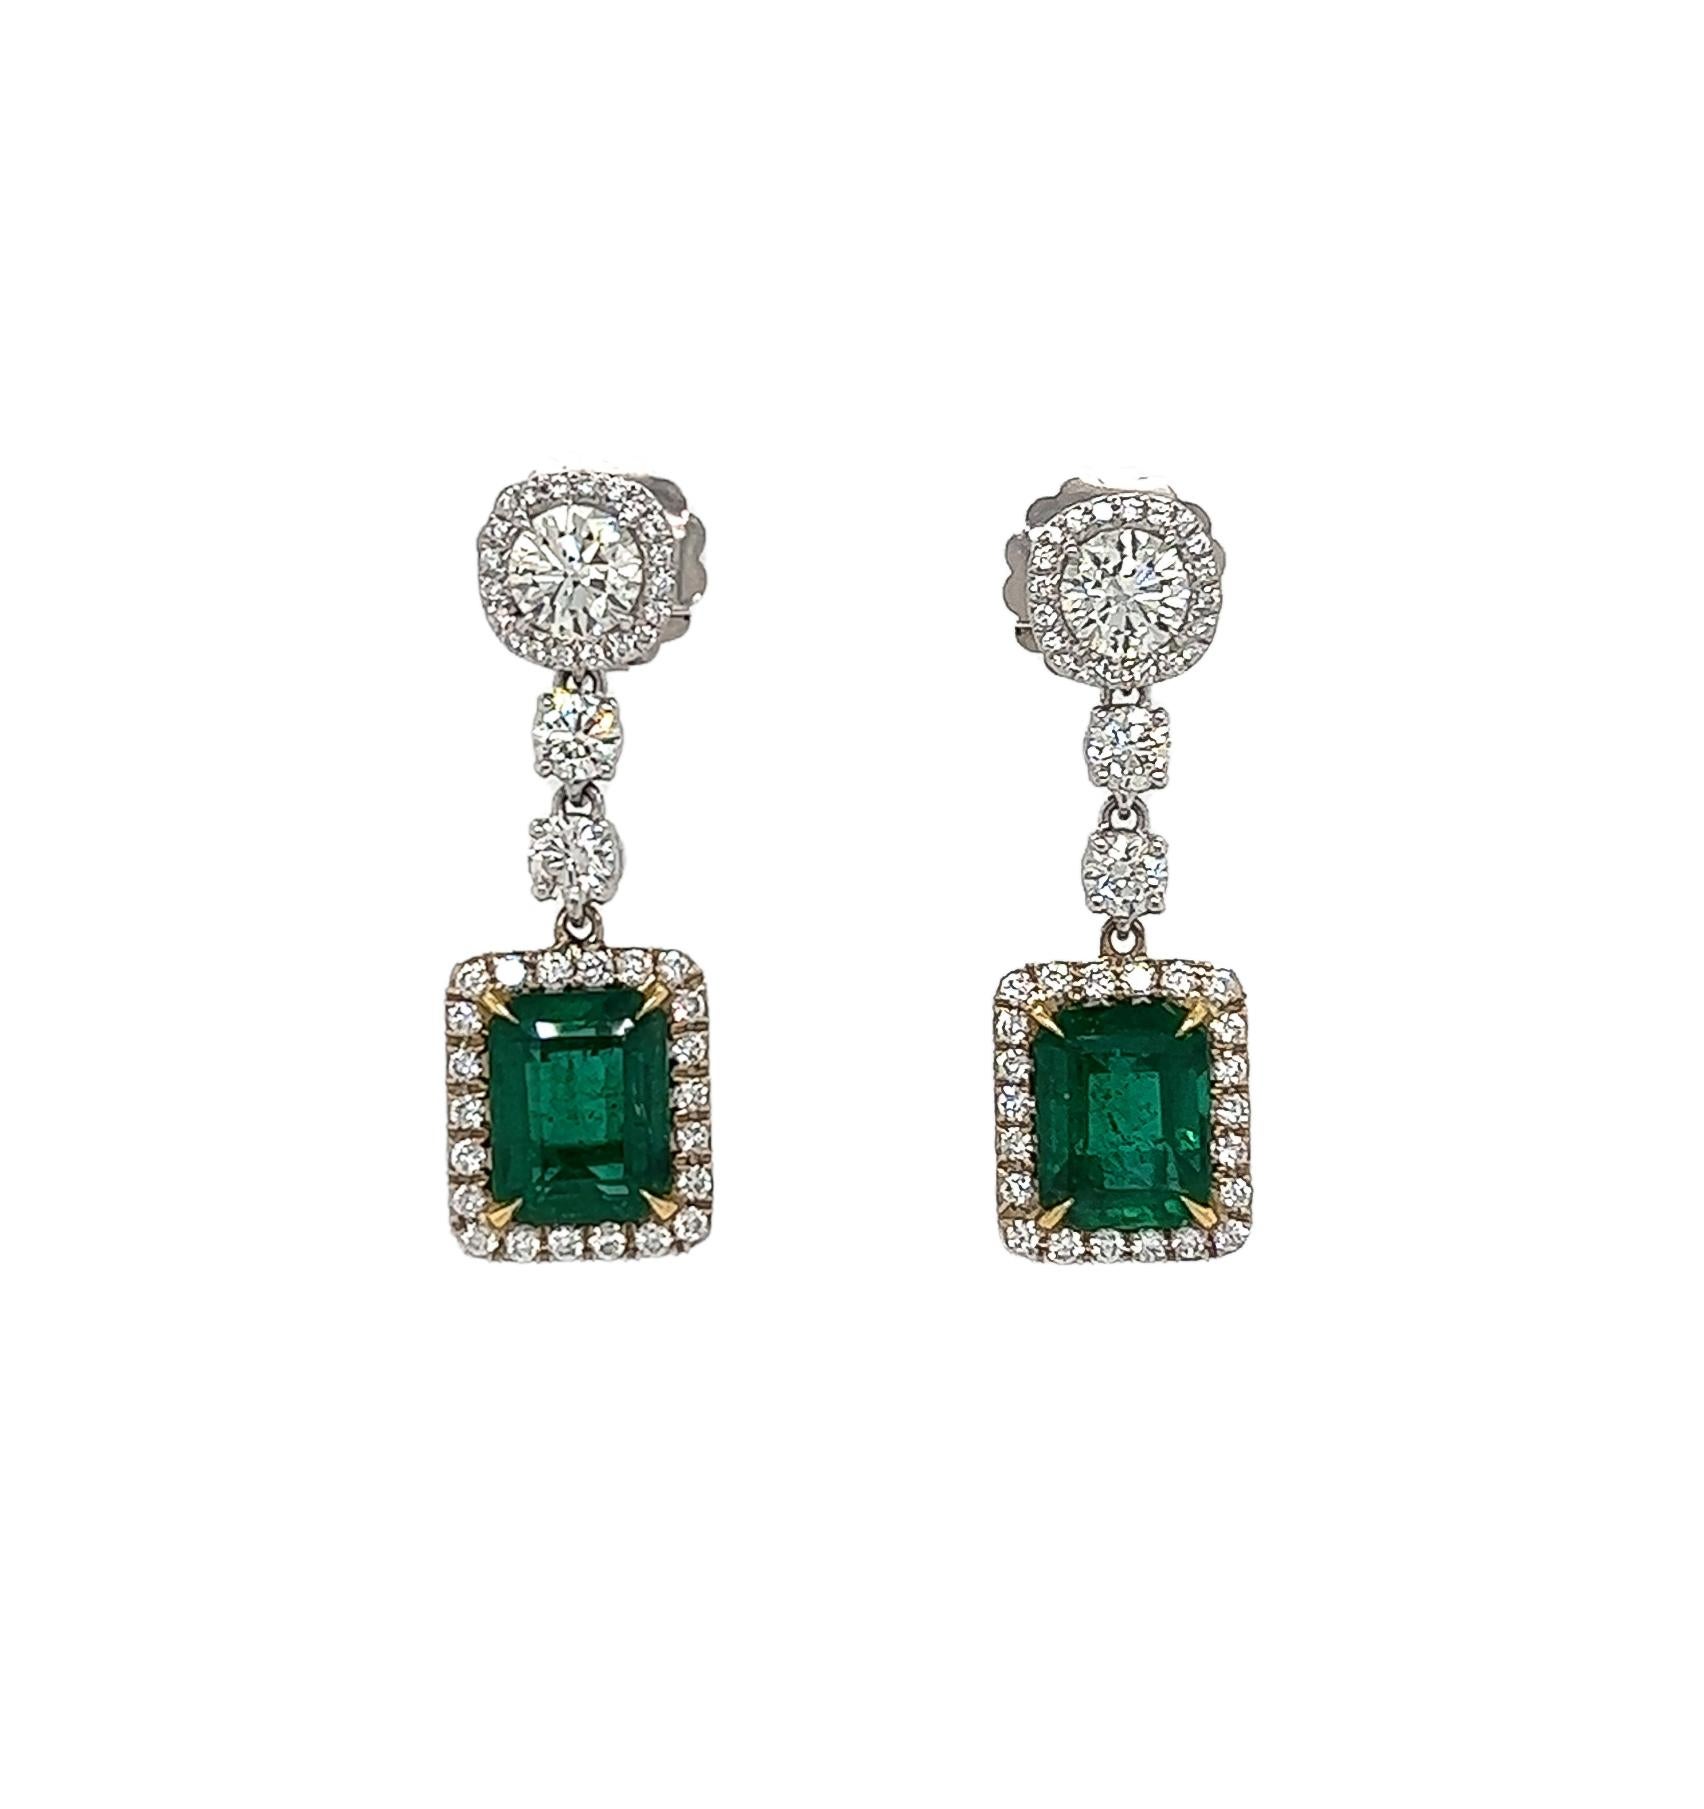 8.47 Total Carat Emerald and Diamond Drop Earrings in 18K White Gold

This gorgeous pair of Emerald earrings are sure to draw all eyes on you. It is created with a generous 5.41 Carats worth of emeralds, surrounded by a halo and drop of round cut